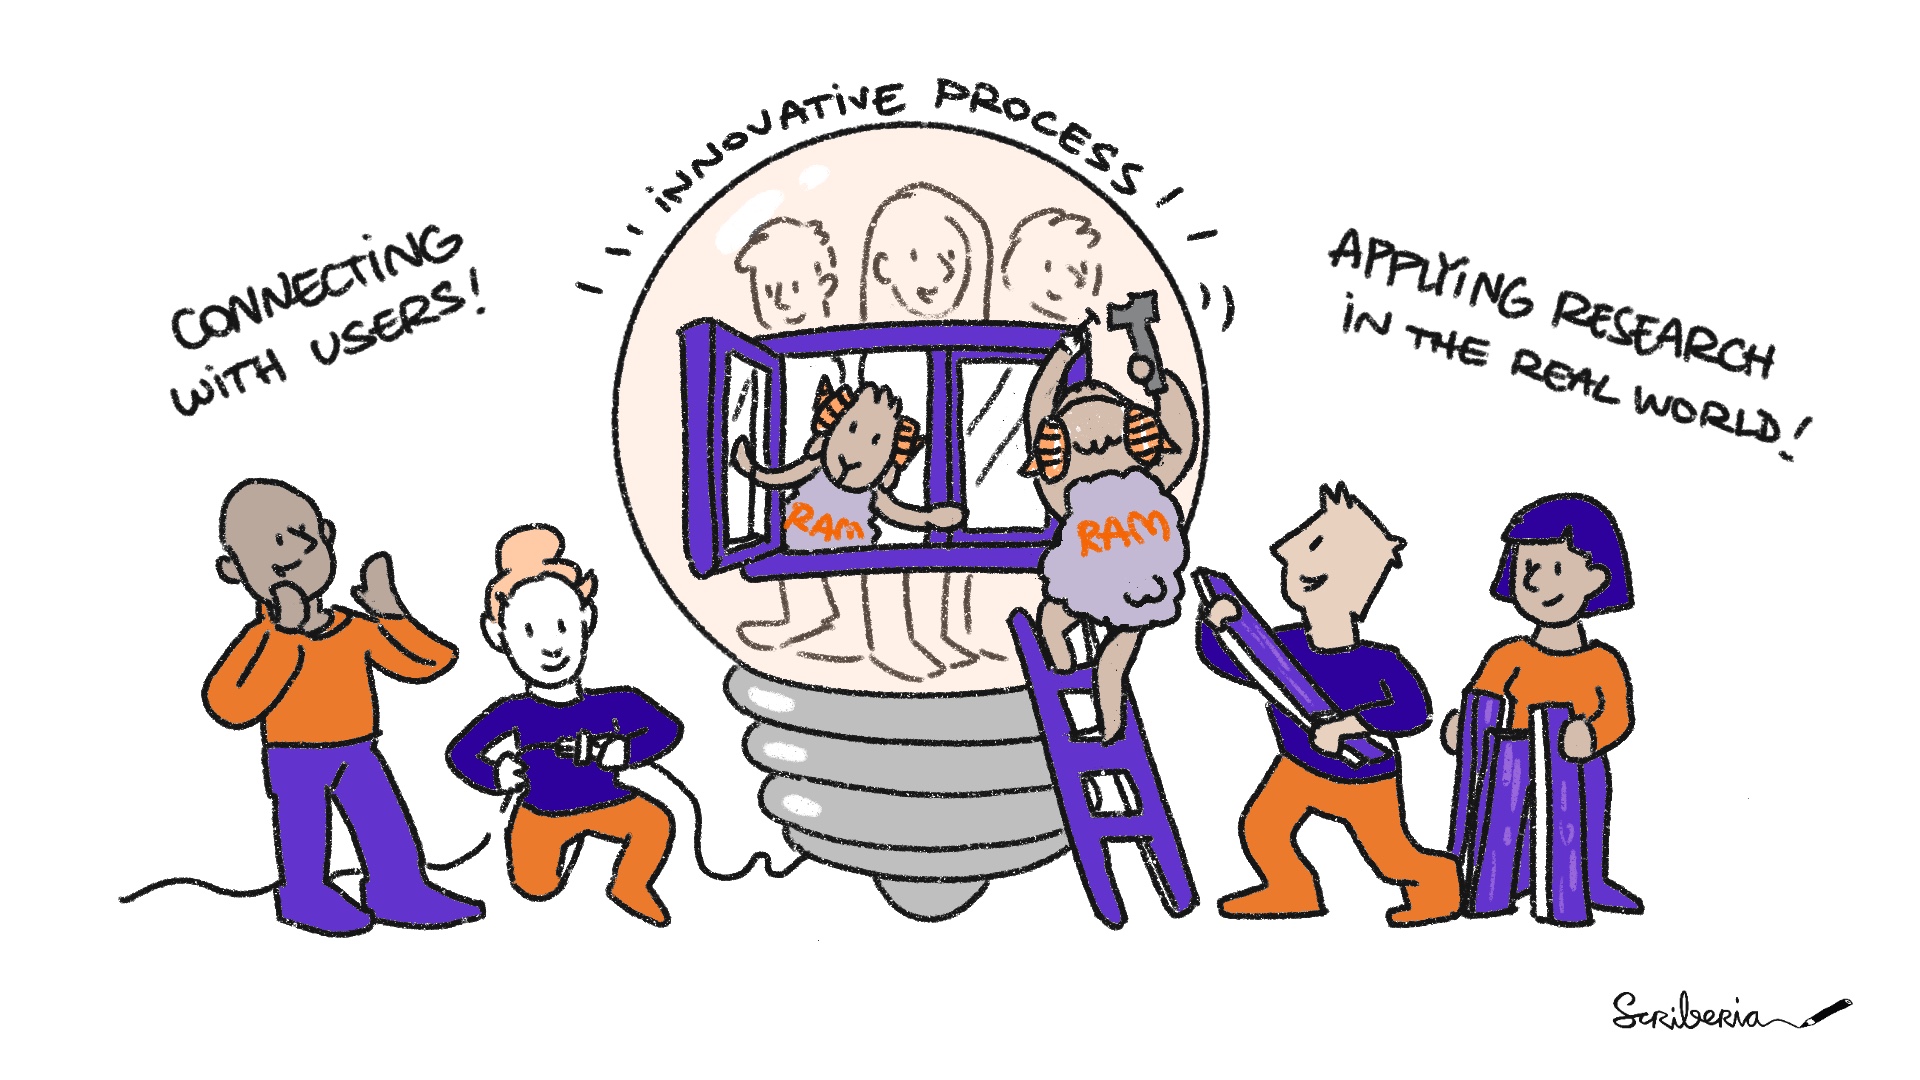 An illustration depicting the animal rams as the research application managers who are connecting with users, applying research in real world and facilitating innovative process in research infrastructure.